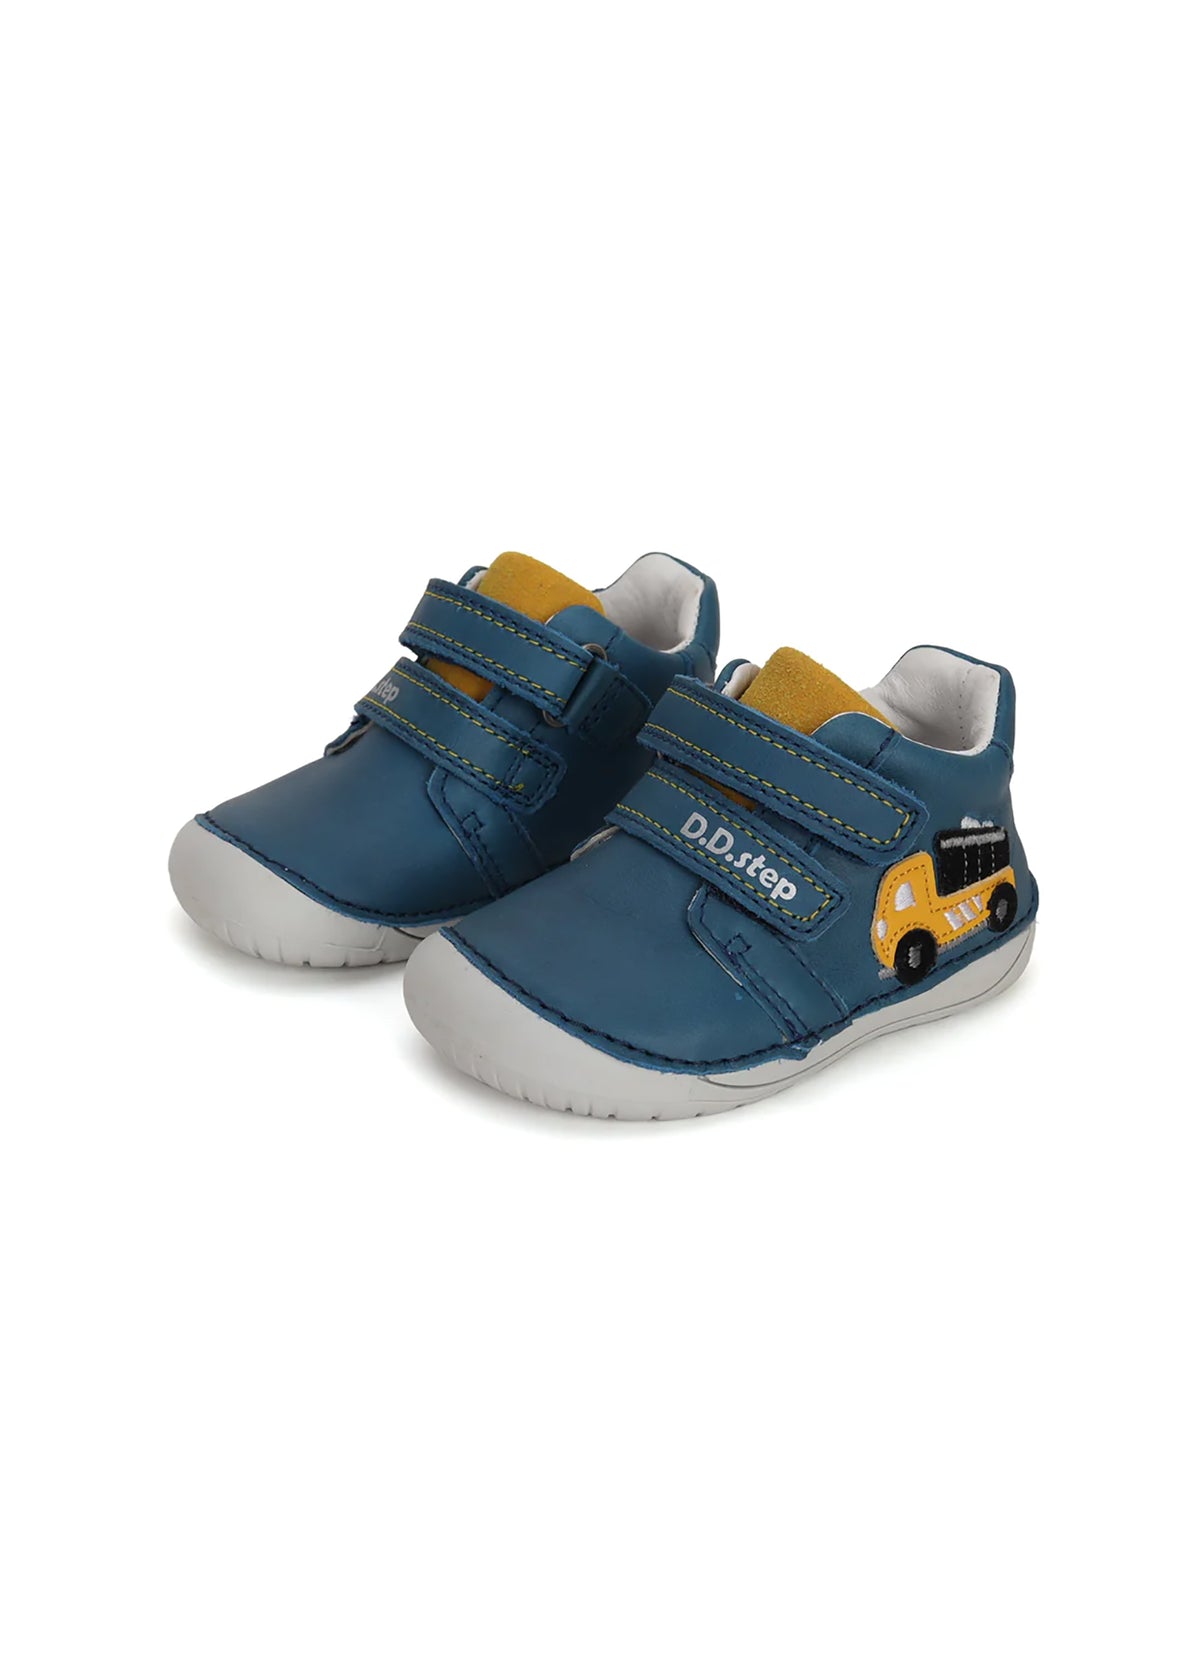 Children's first step shoes - blue leather, yellow truck